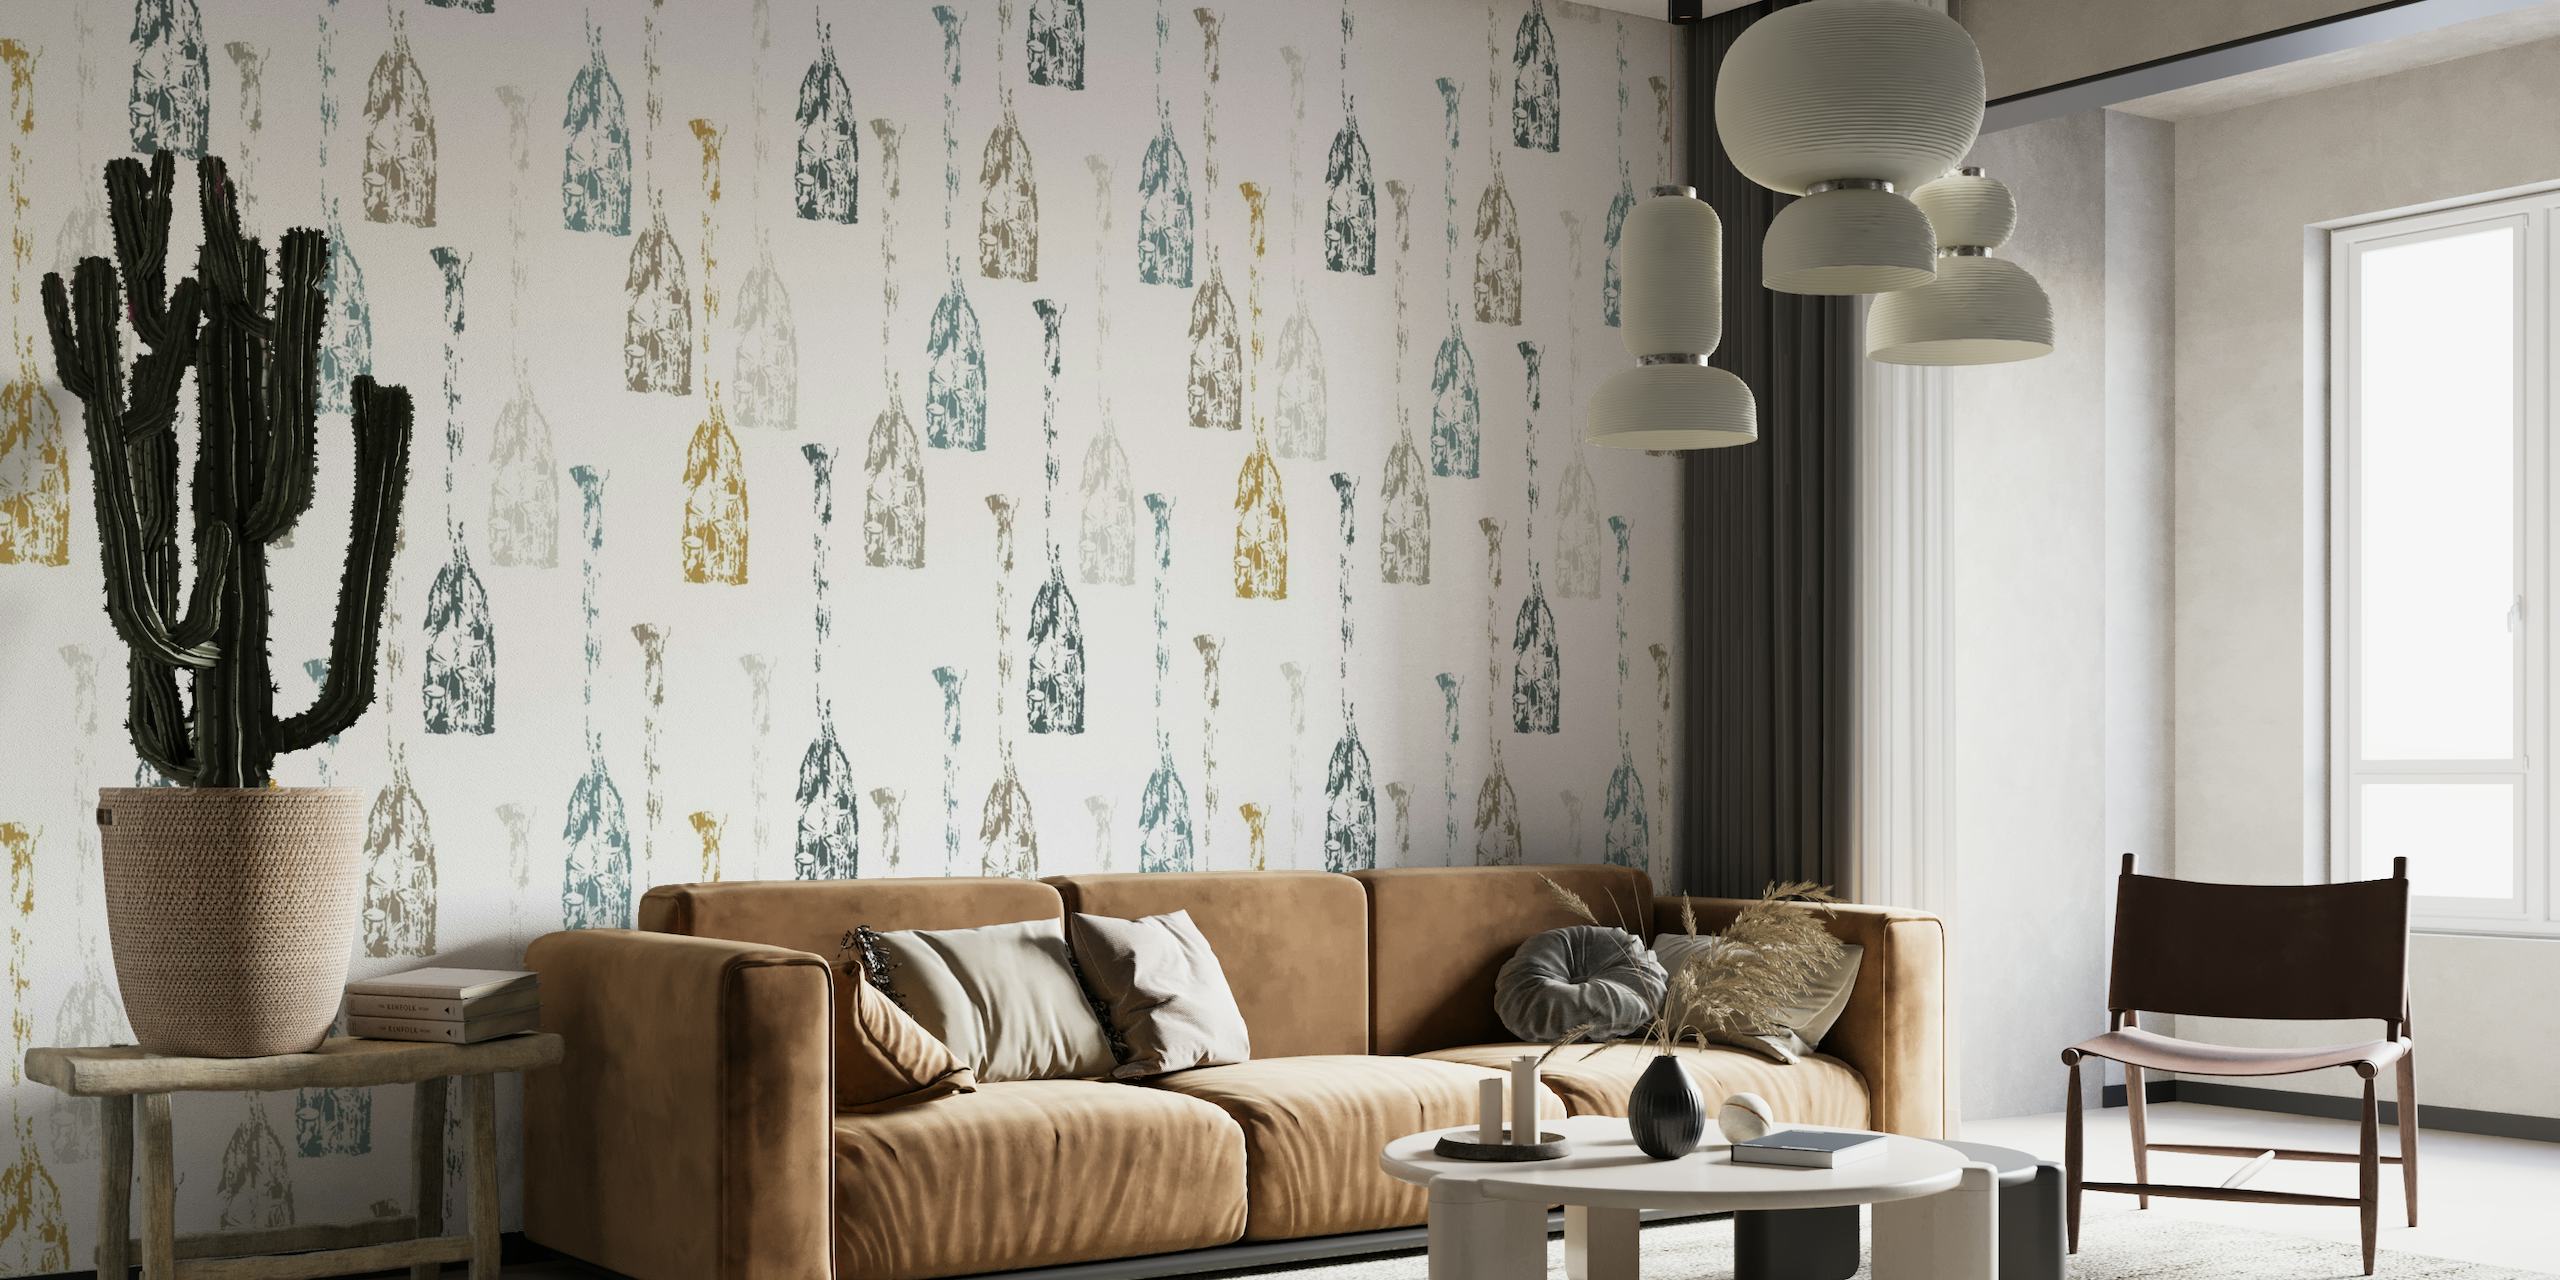 Cream-colored wall mural with artistic paddle designs